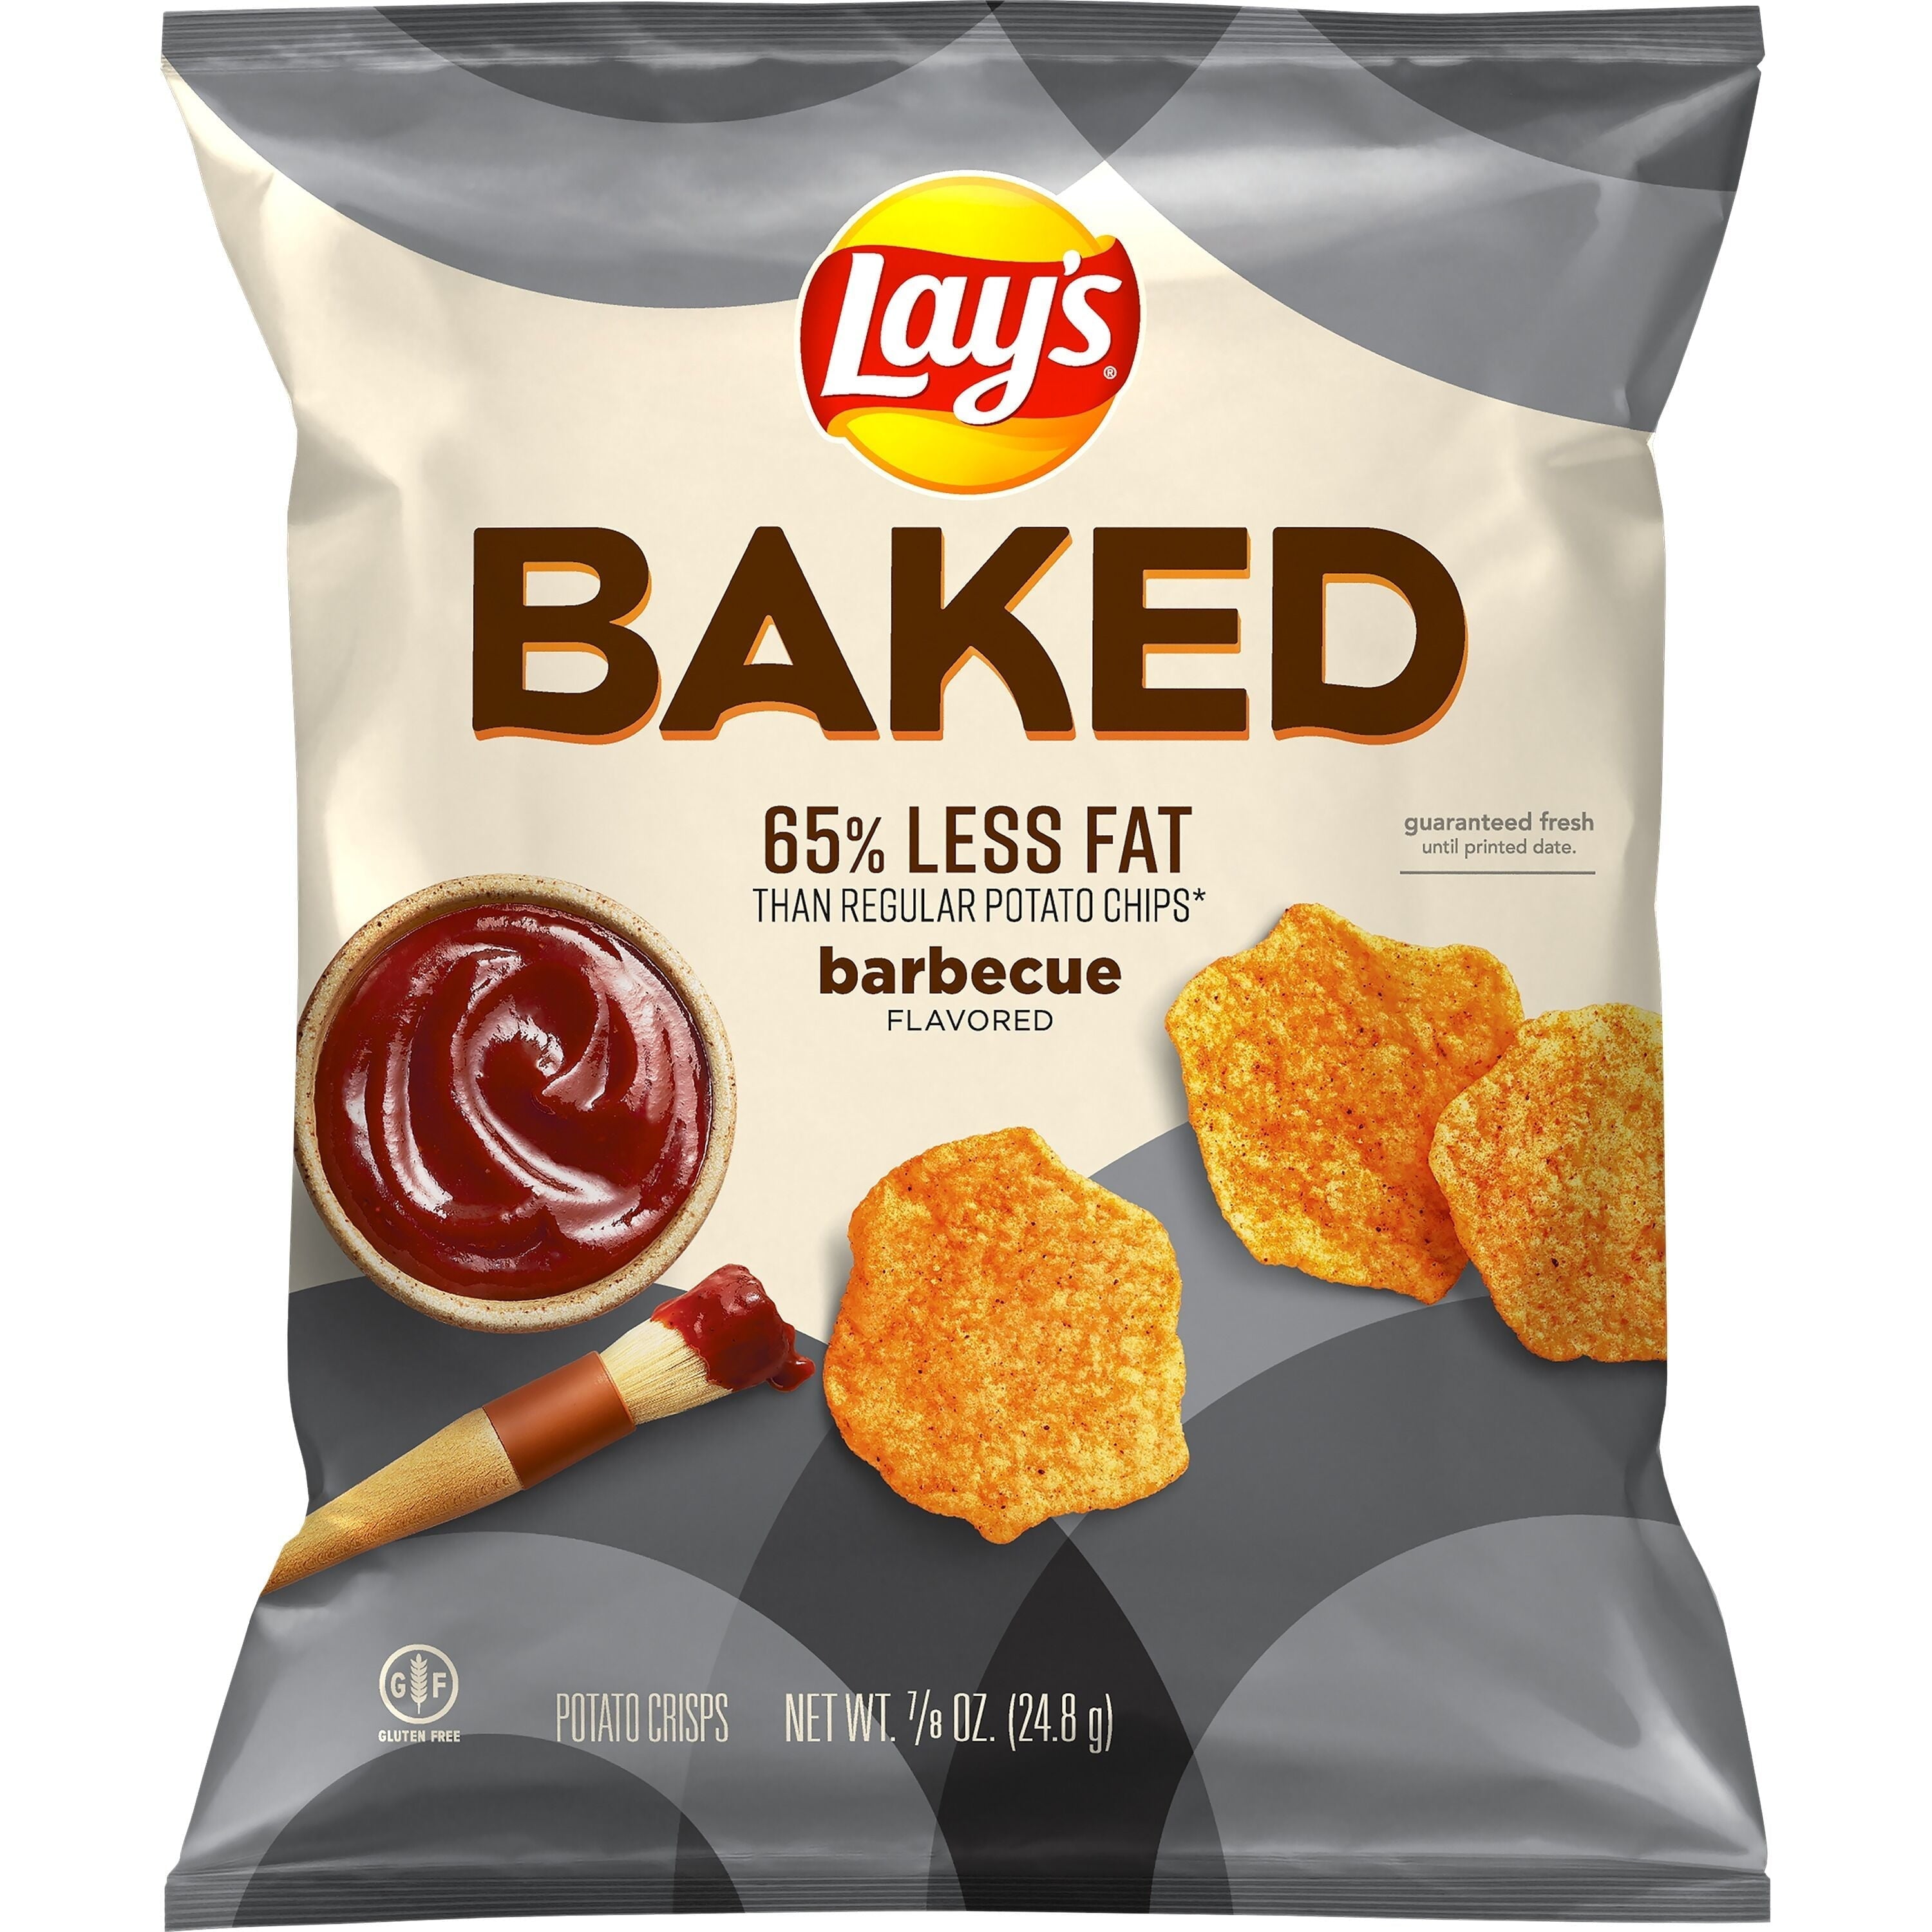 Wholesale prices with free shipping all over United States Frito-Lay Baked and Popped Mix Variety Pack, 18 Count - Steven Deals